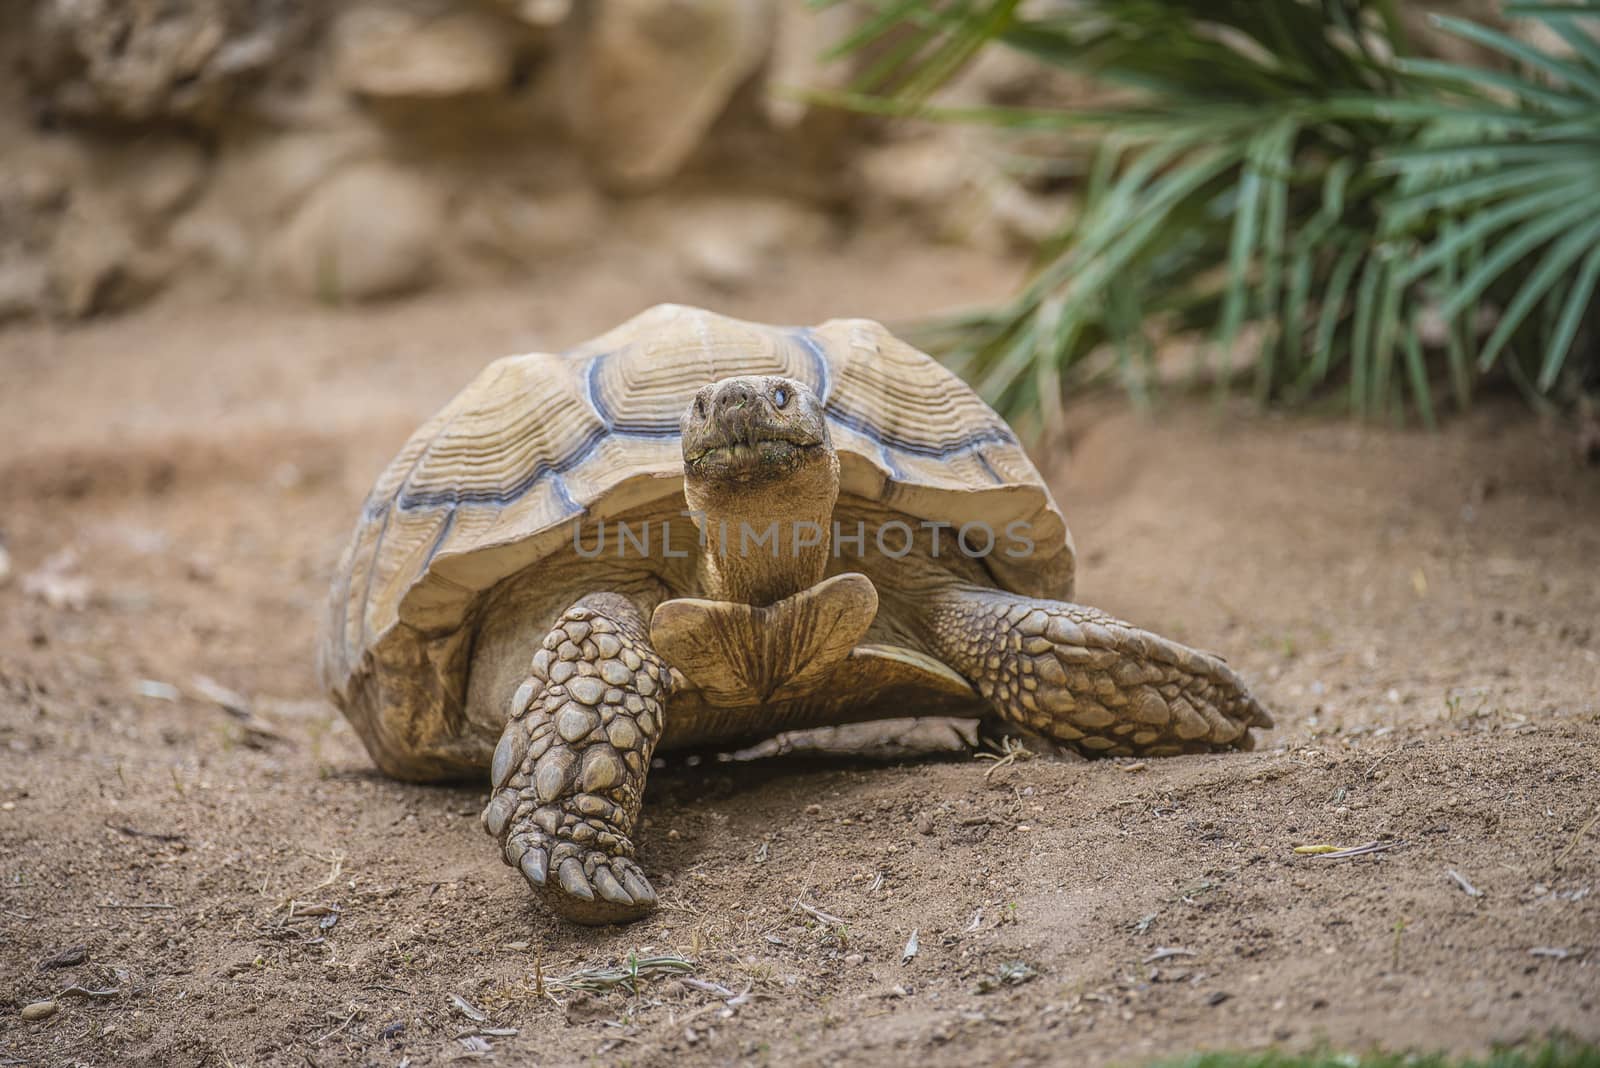 The African spurred tortoise (Geochelone sulcata), also called the sulcata tortoise, is a species of tortoise which inhabits the southern edge of the Sahara desert, in northern Africa.